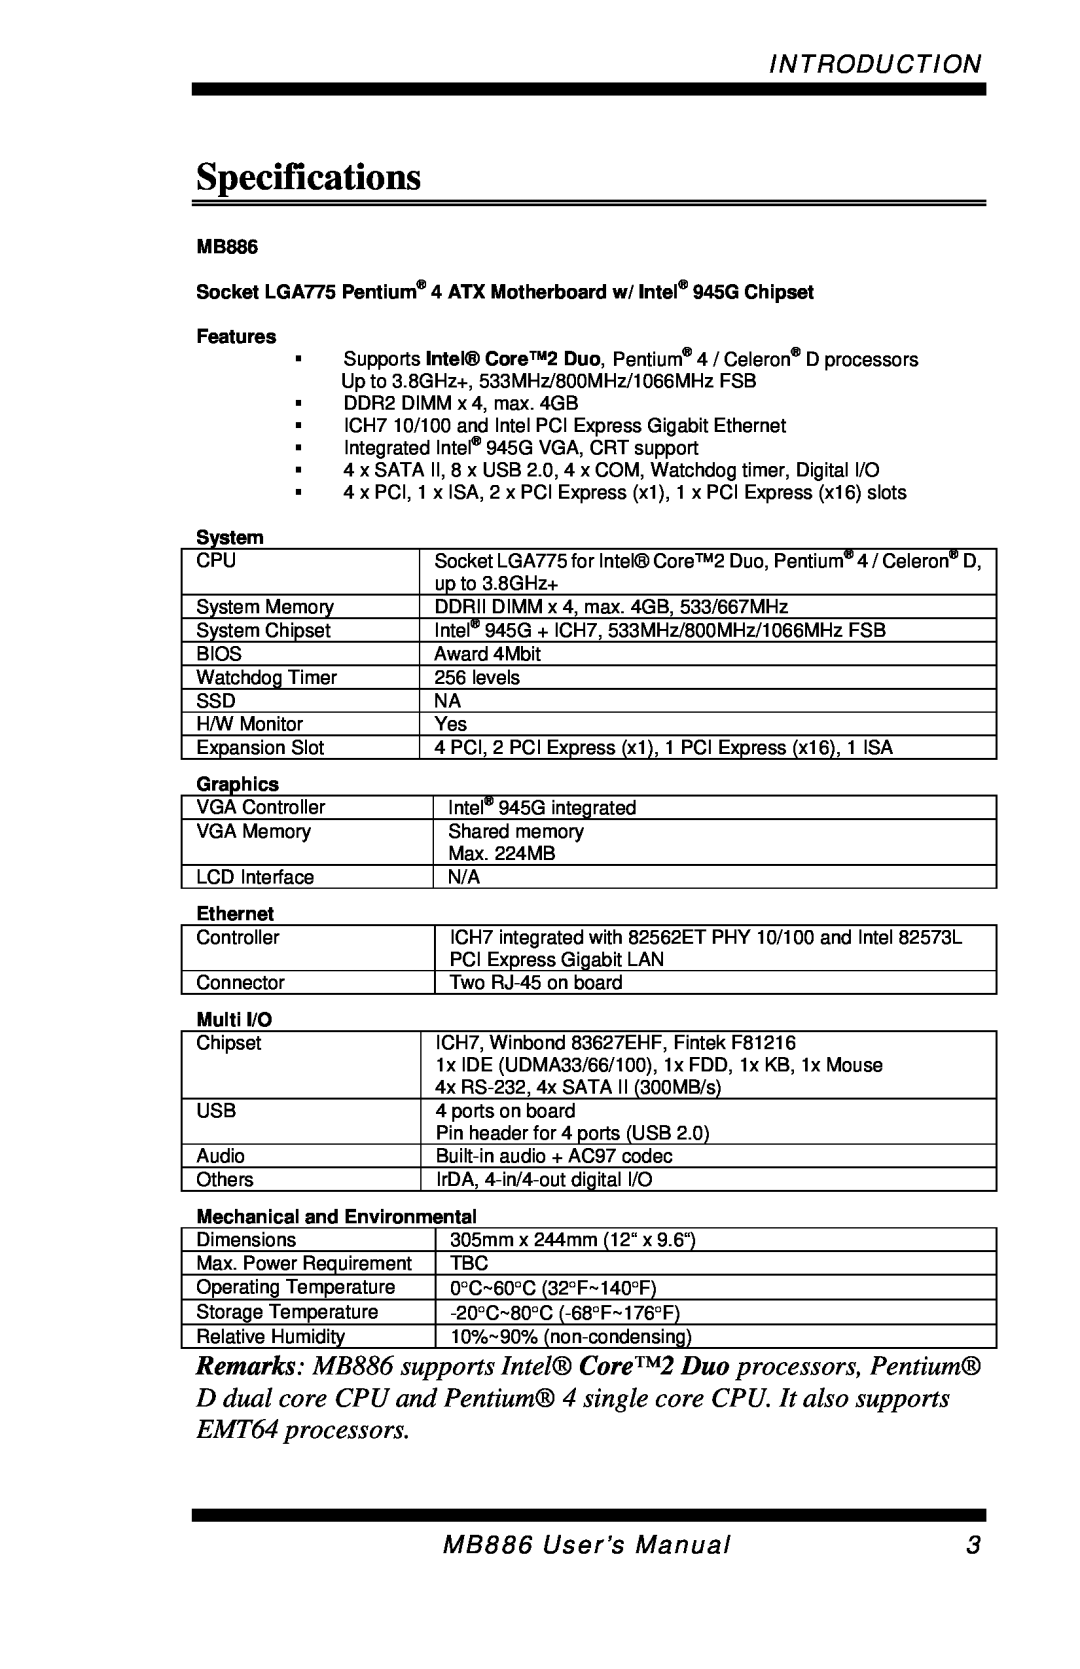 Intel MB886 user manual Specifications, Introduction, System, Graphics, Ethernet, Multi I/O, Mechanical and Environmental 